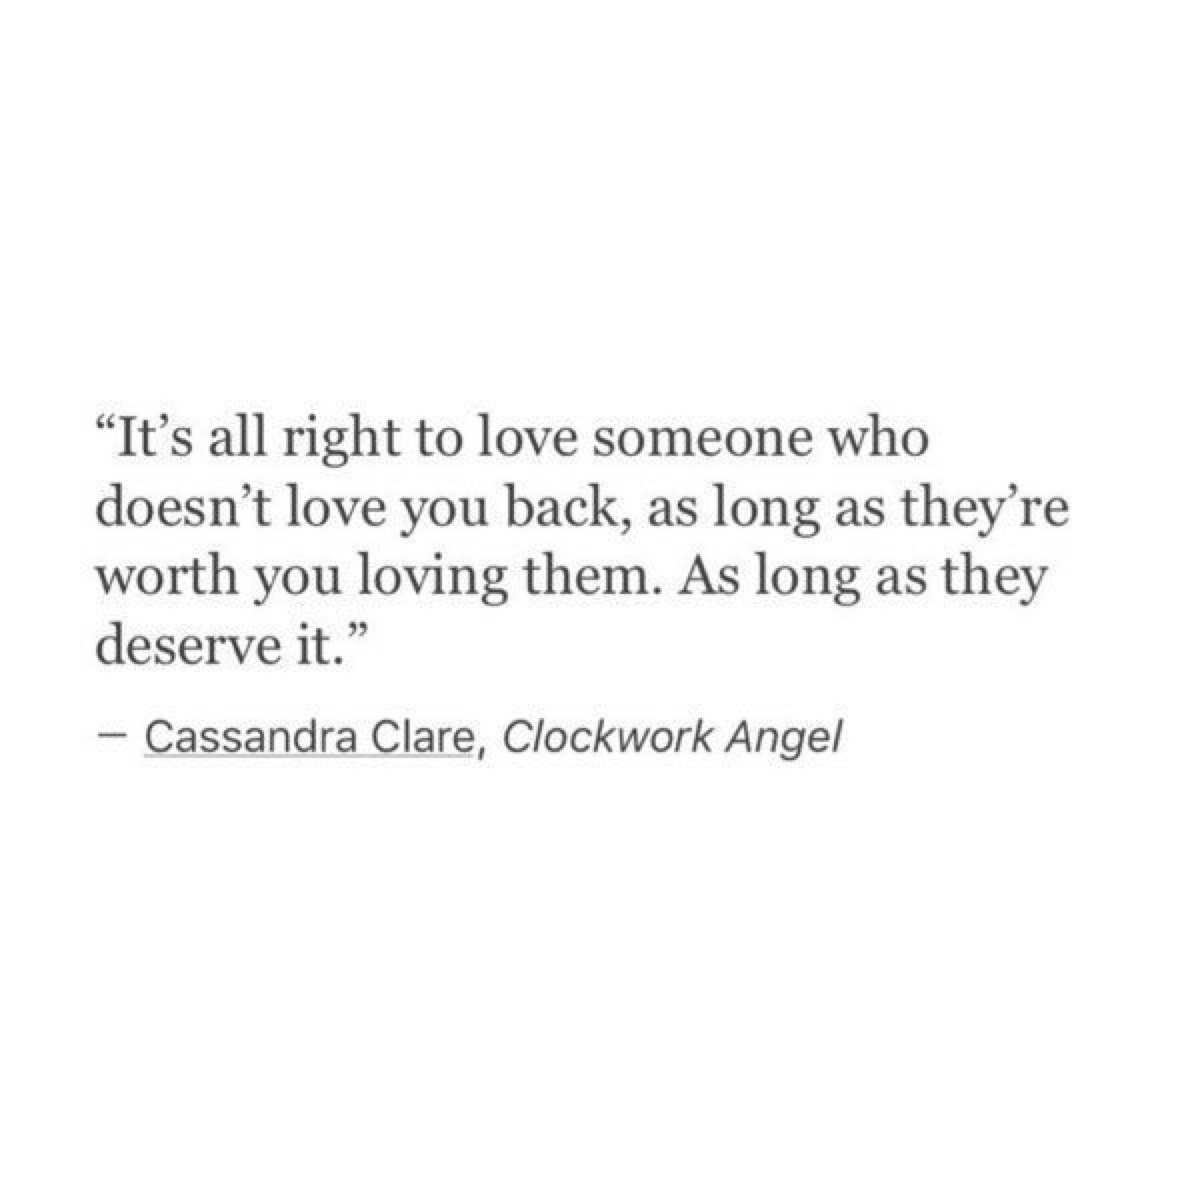 poetry cassandra clare written spilled words life quotes deep quotes love qoutes thoughts deep thoughts deep thinking life spilled poem spilled ink